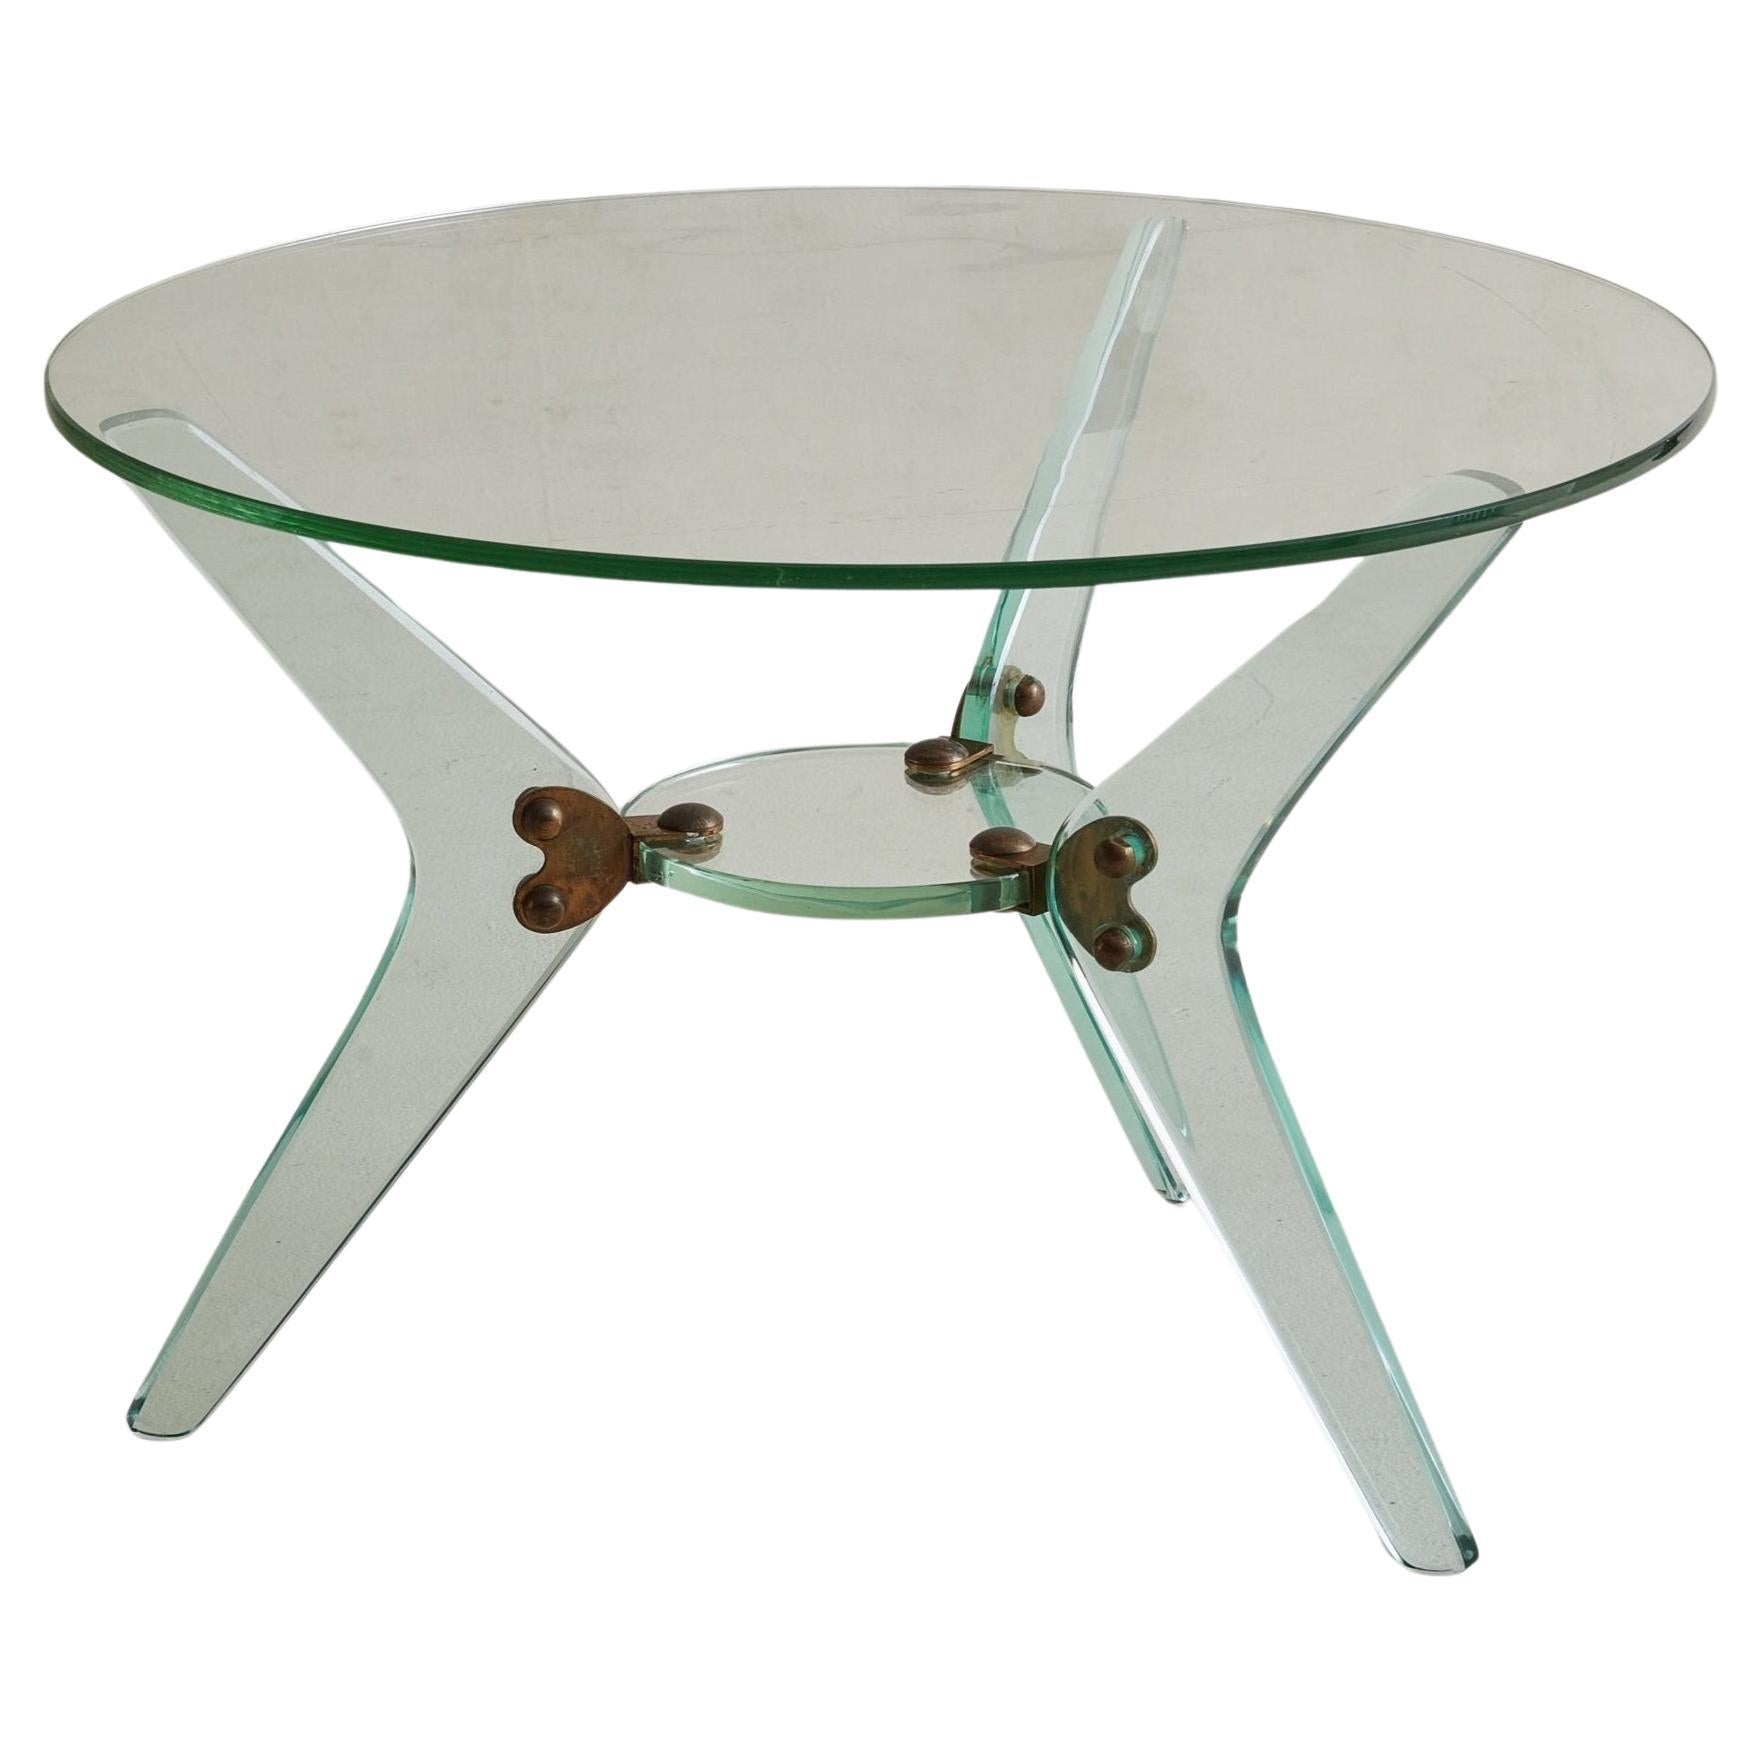 Italian Petite Round Glass + Lucite Cocktail Table, Italy Circa 1950s For Sale